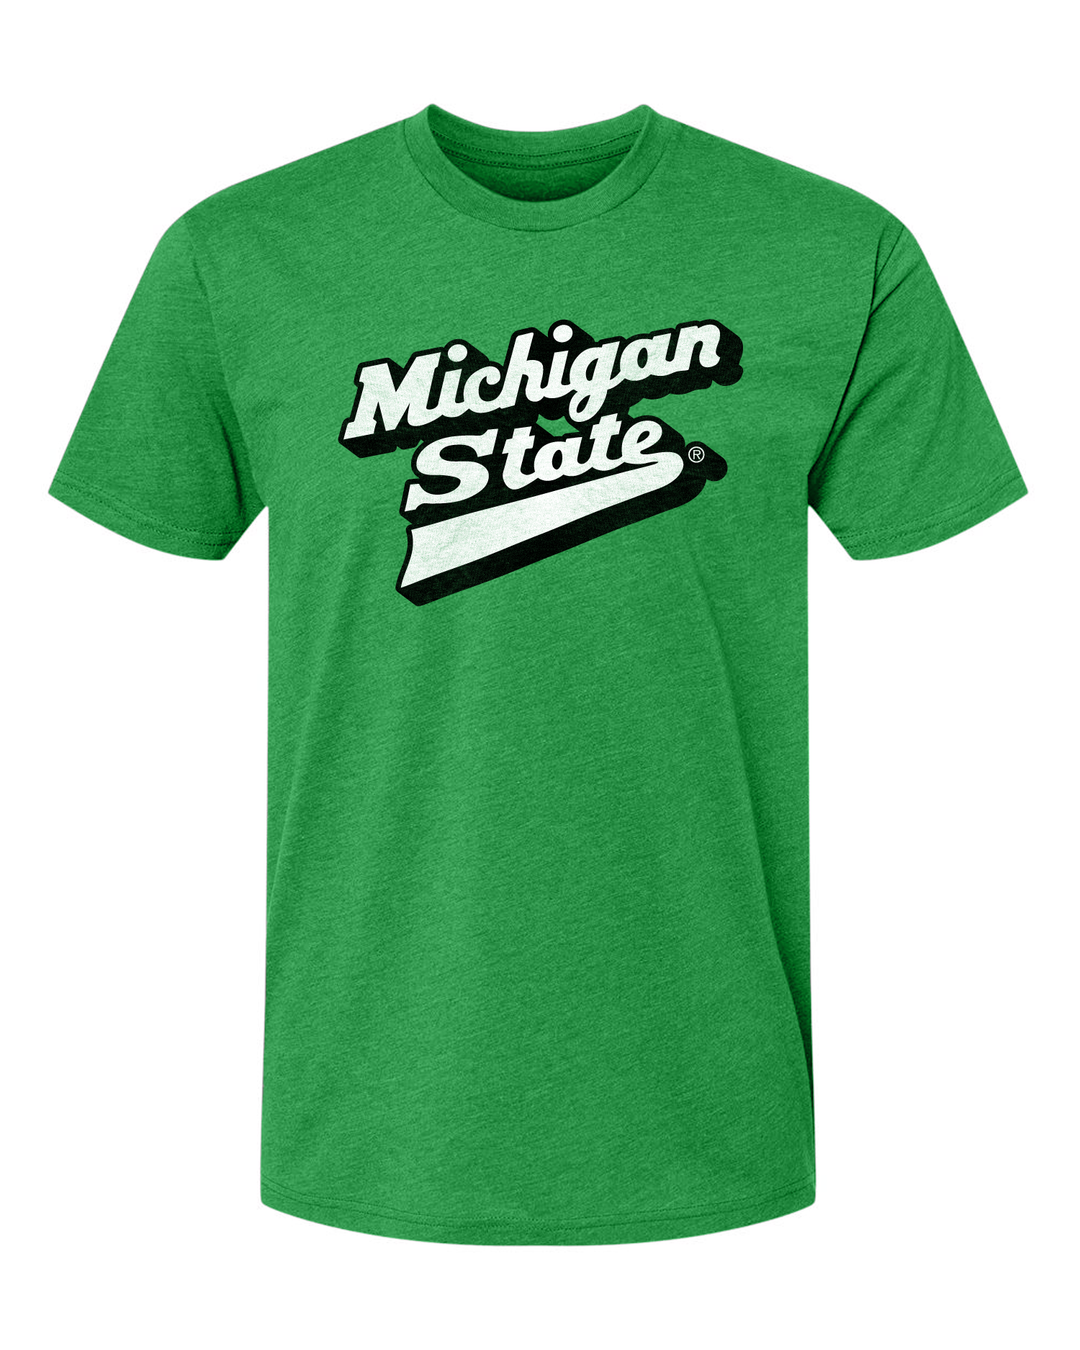 Kelly Green Michigan State T-Shirt with Hockey Logo Printed on the Chest